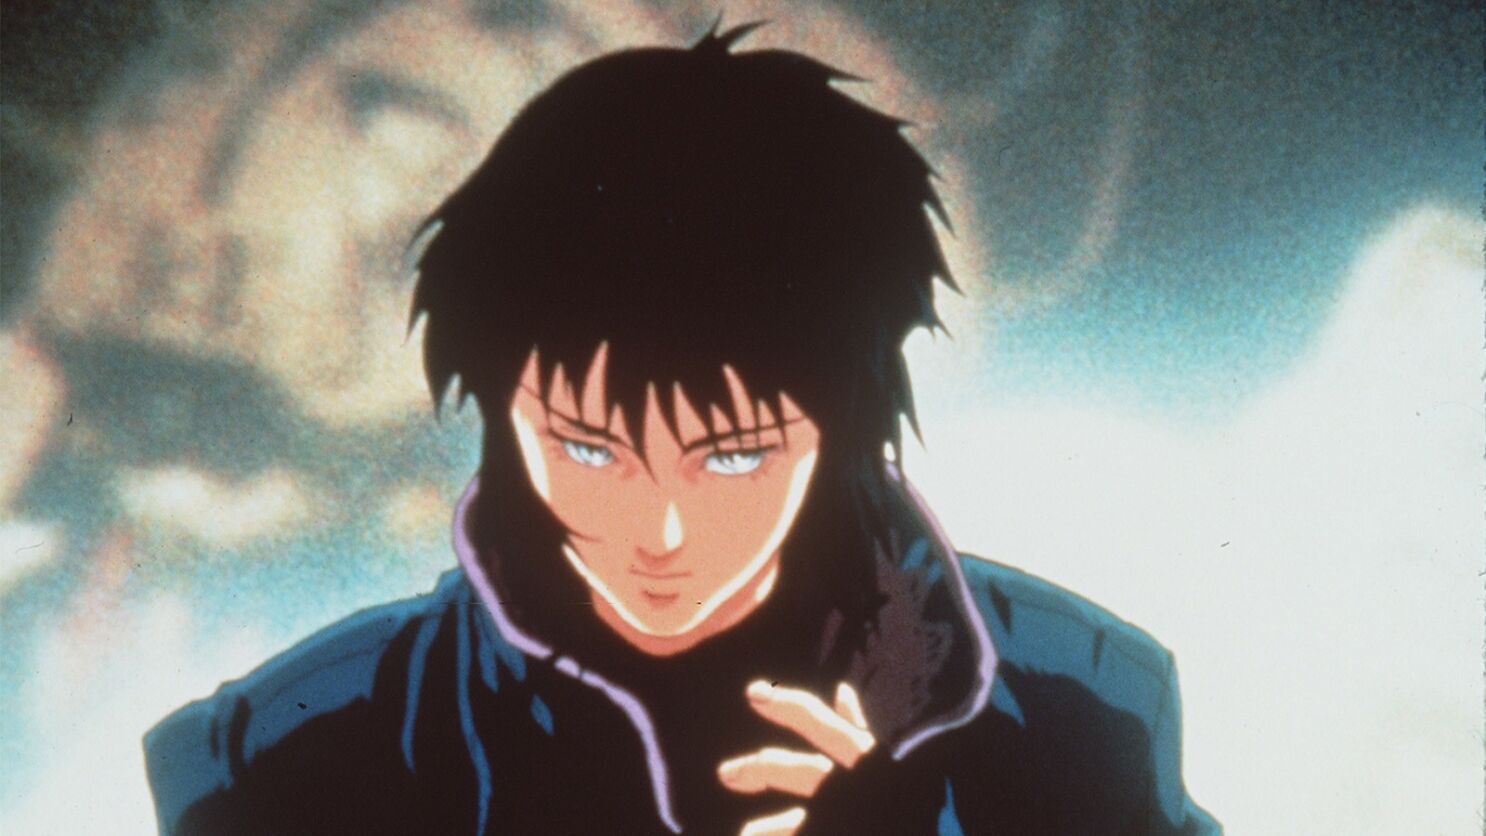 The original 'Ghost in the Shell' was a watershed film in animation history  - Los Angeles Times